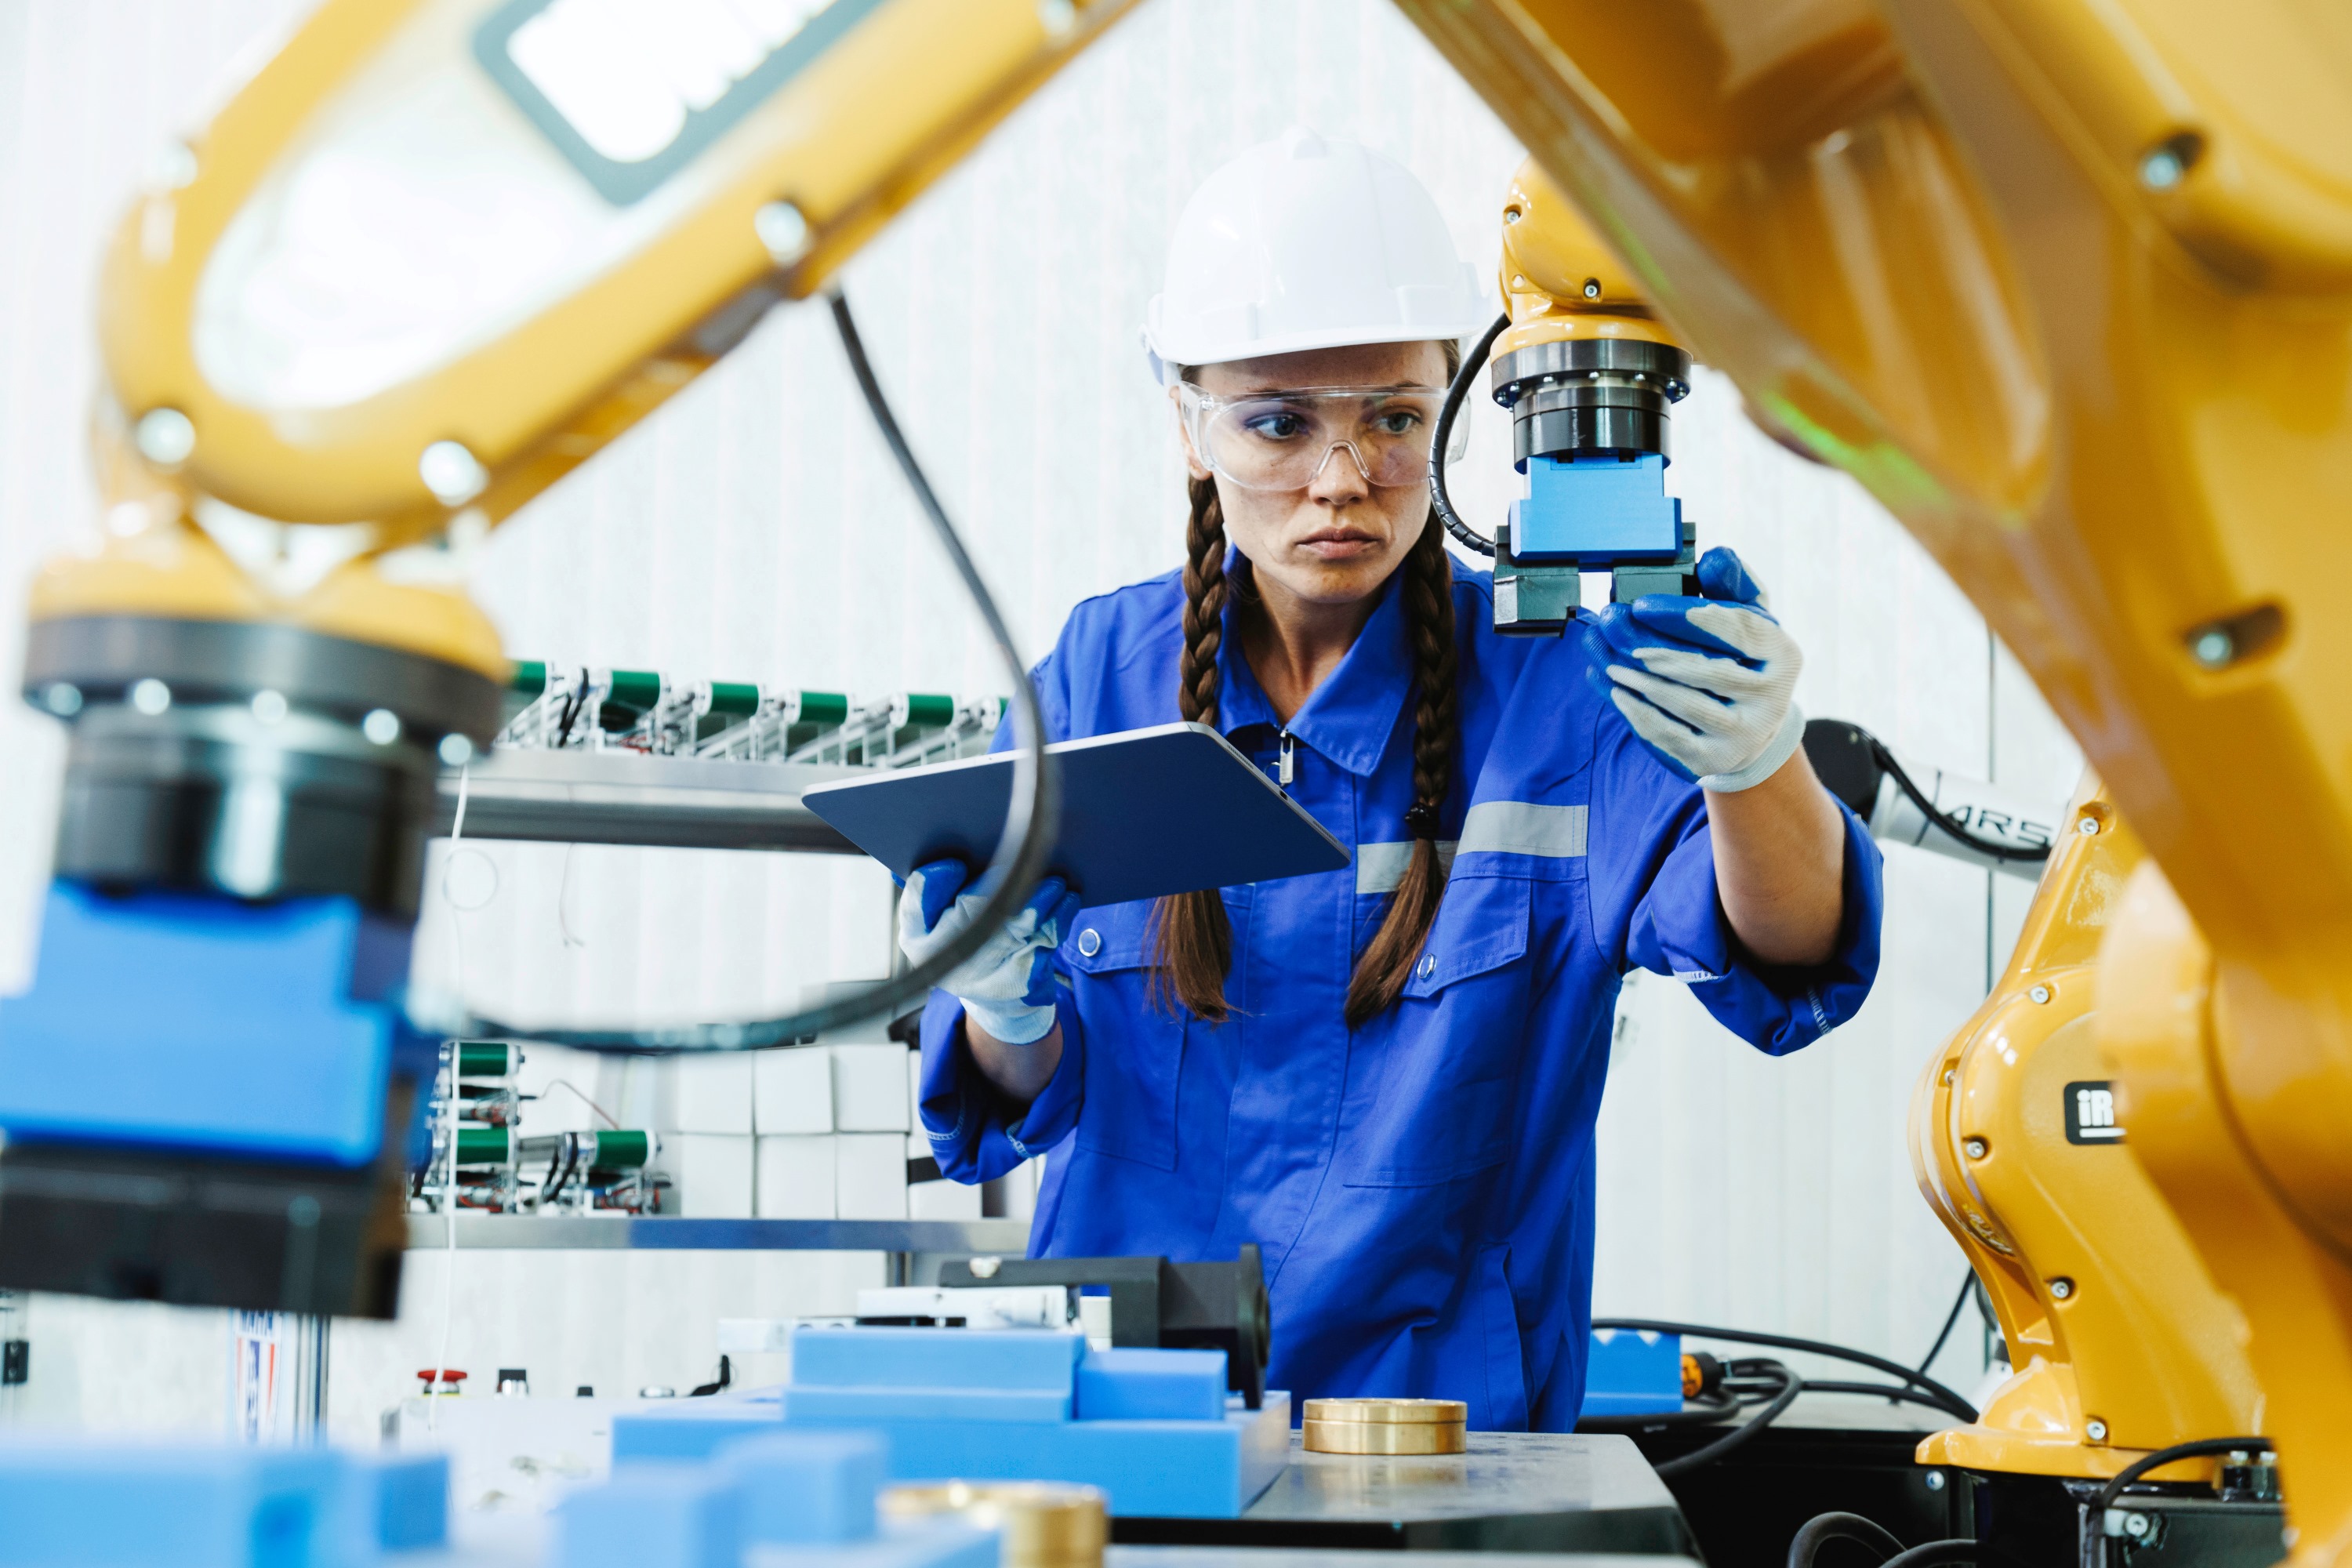 A woman with her hair in braids, wearing work clothes and a hard hat, checks gripper placement on an industrial robot. She is holding a tablet HMI in her other hand.